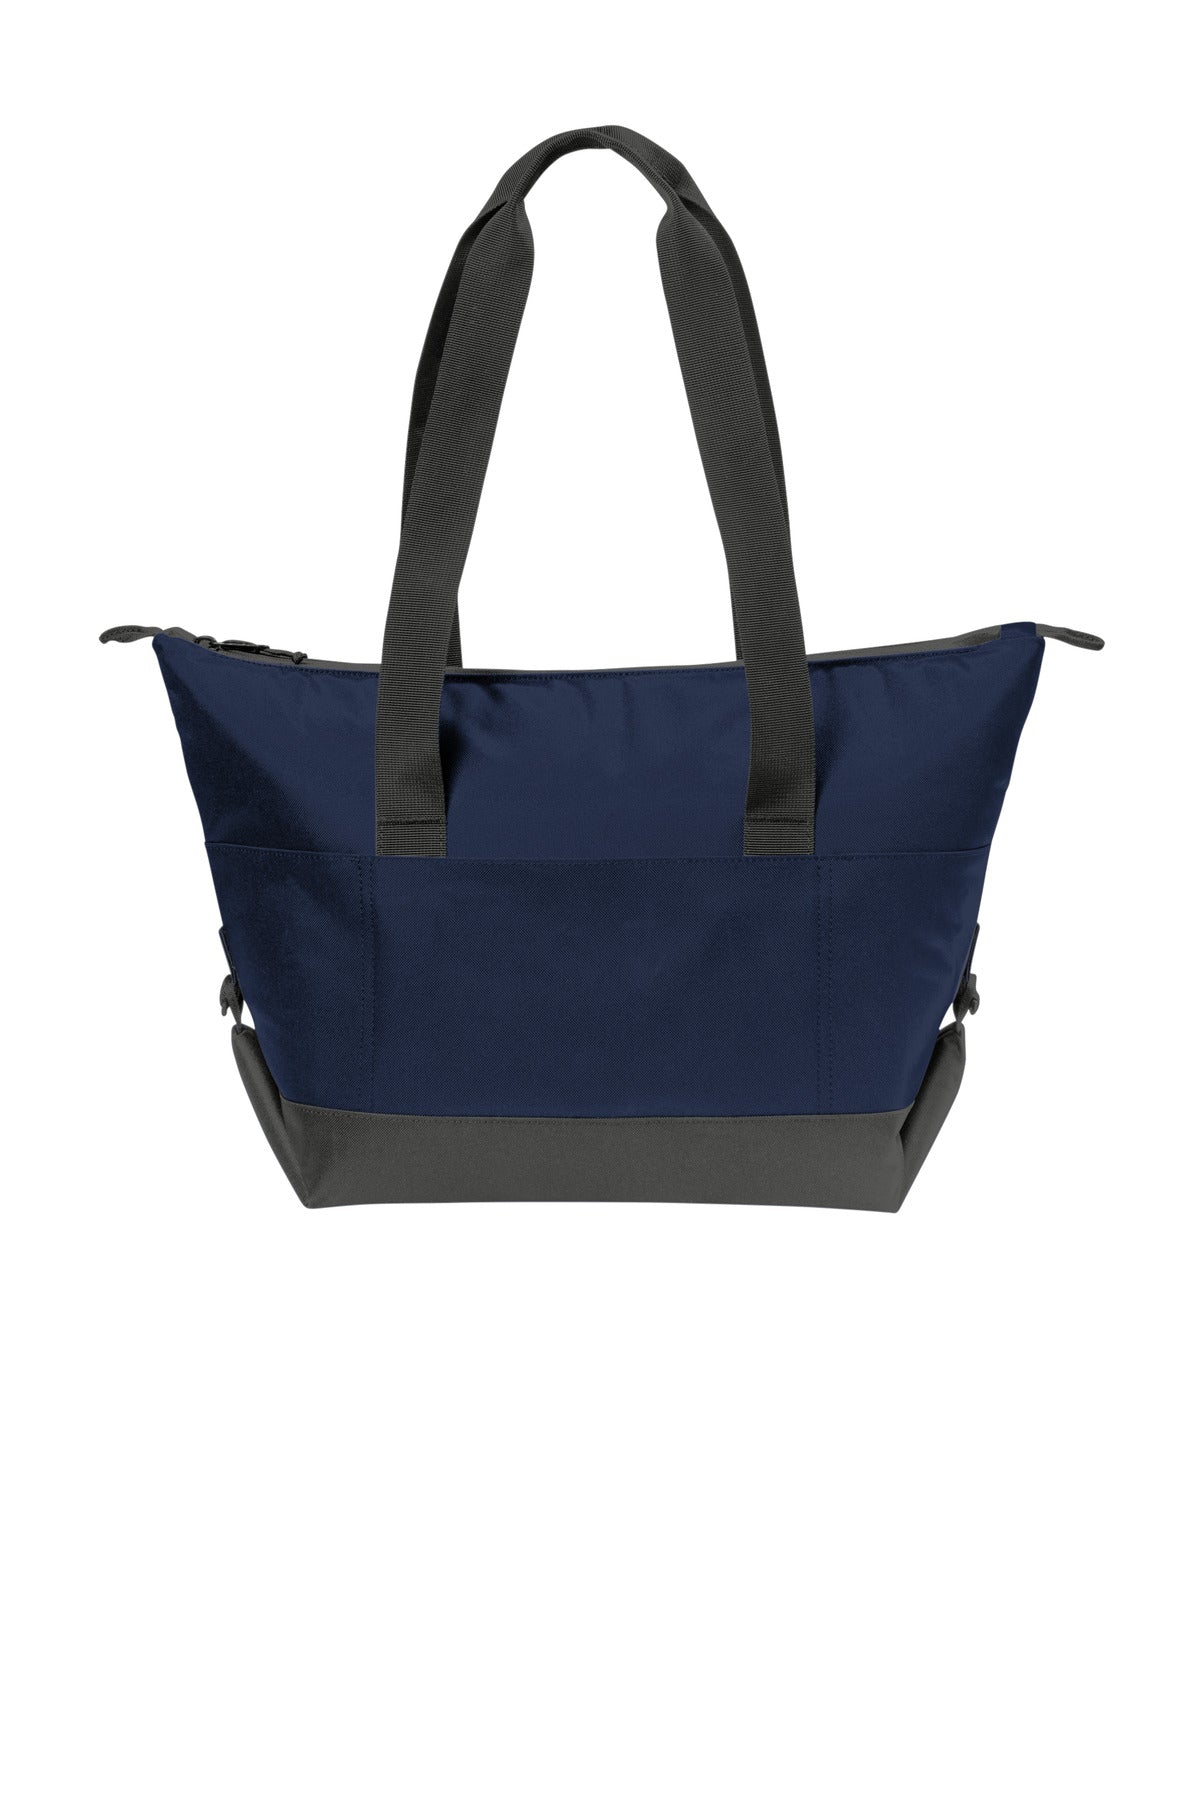 Photo of Port Authority Bags BG516  color  River Blue Navy/ Dark Charcoal